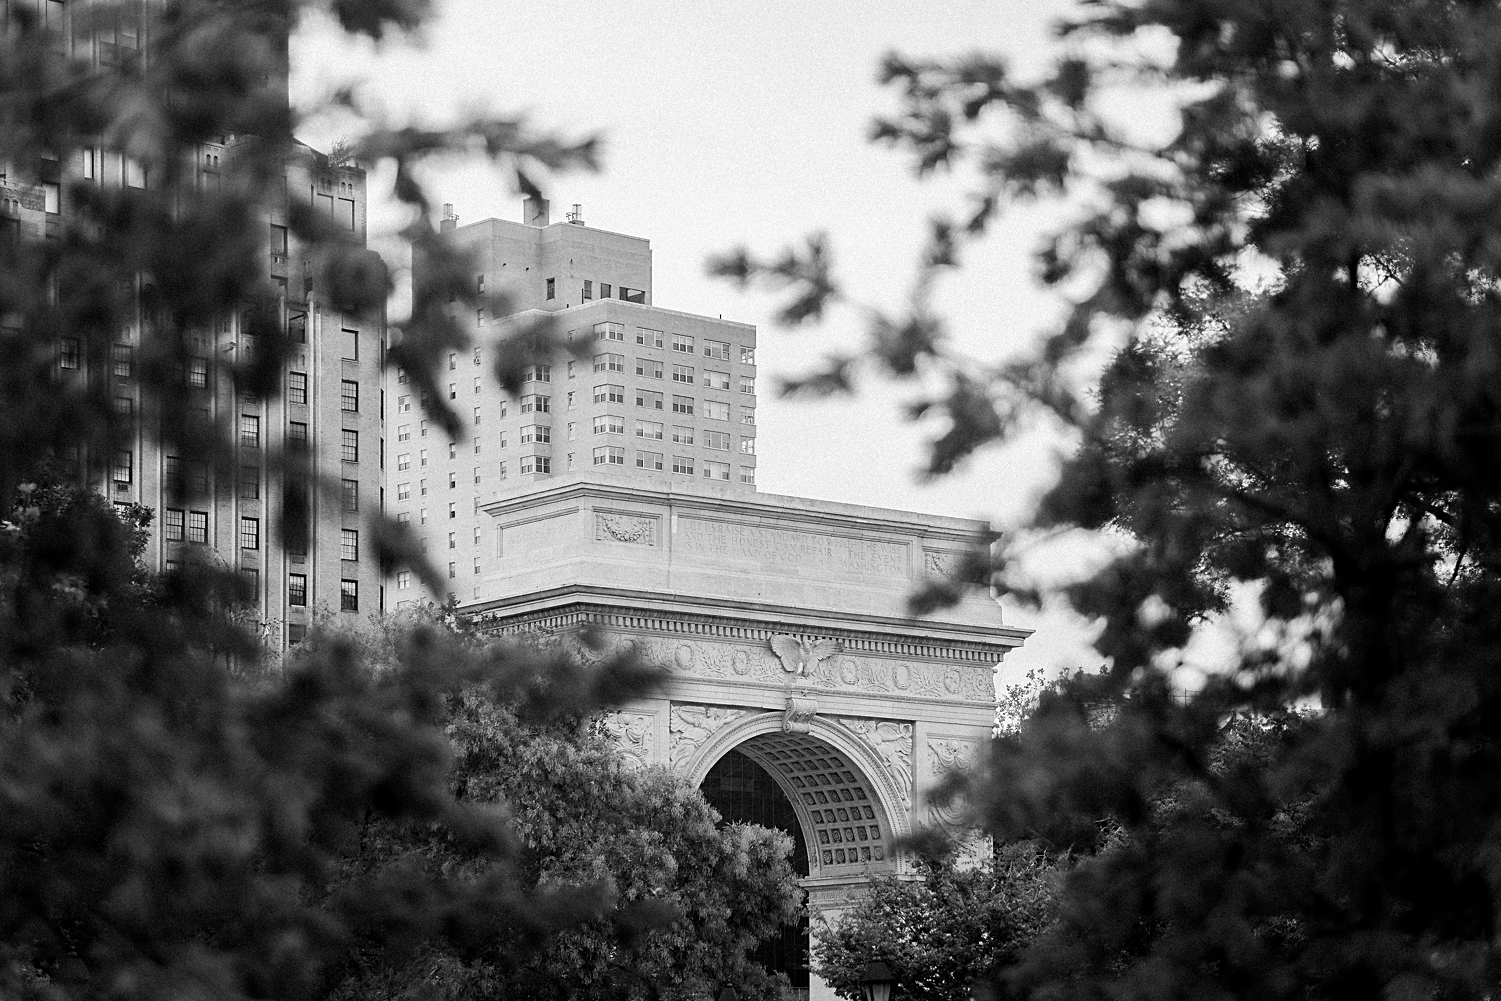 Washington Square Park Arch from behind trees